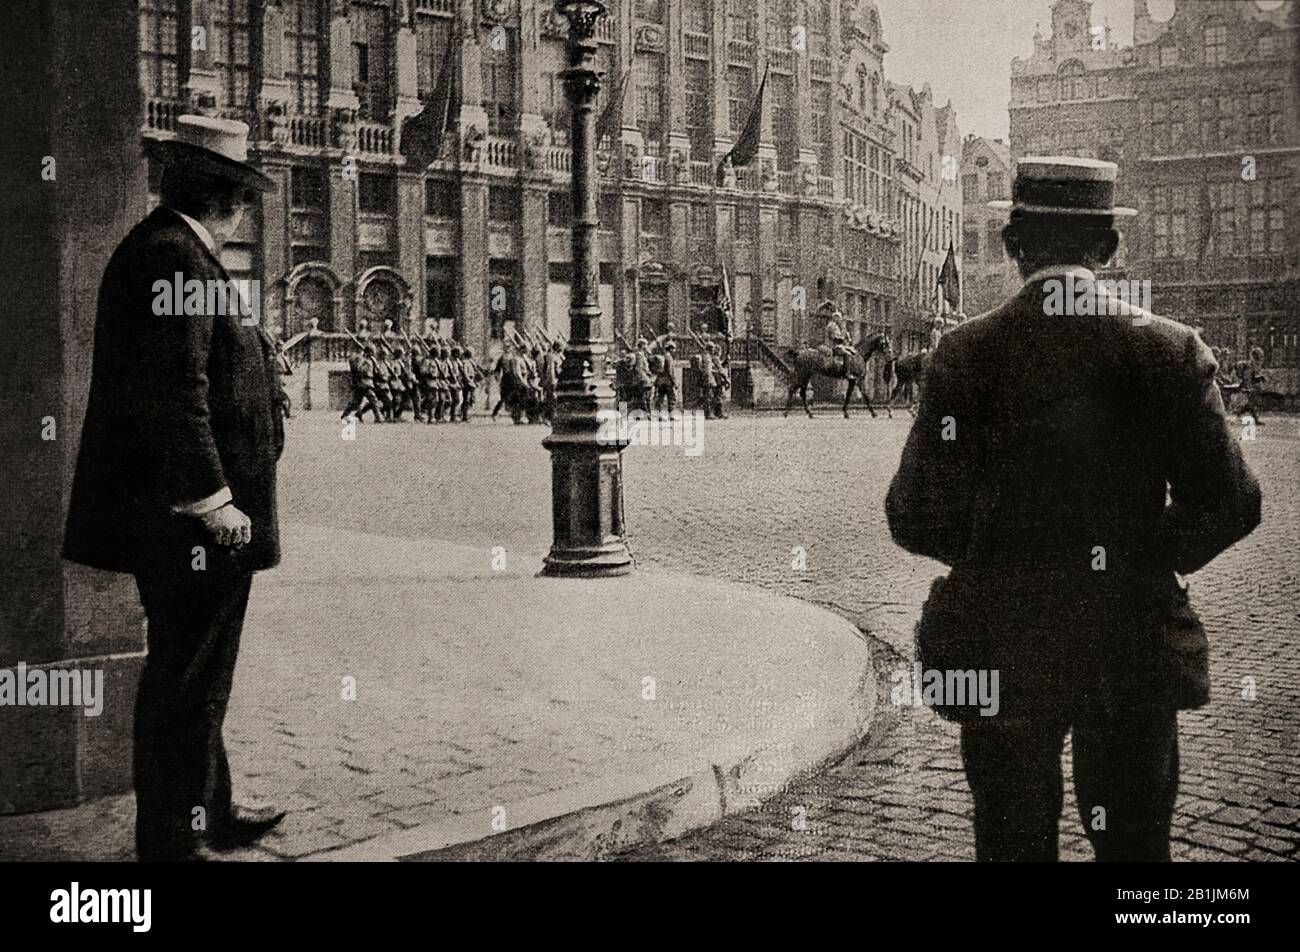 German troops marching in to Brussels. On 24 July 1914, the Belgian government had announced that if war came it would uphold its historic neutrality. On 2 August, the German government sent an ultimatum to Belgium, demanding passage through the country. The Belgian government refused the demands, the German government declared war on Belgium on 4 August. Following sieges of Belgian fortresses along the Meuse river at Namur and the surrender of the last forts, the government abandoned the capital, Brussels, on 17 August and on 20th August, the city was occupied. Stock Photo